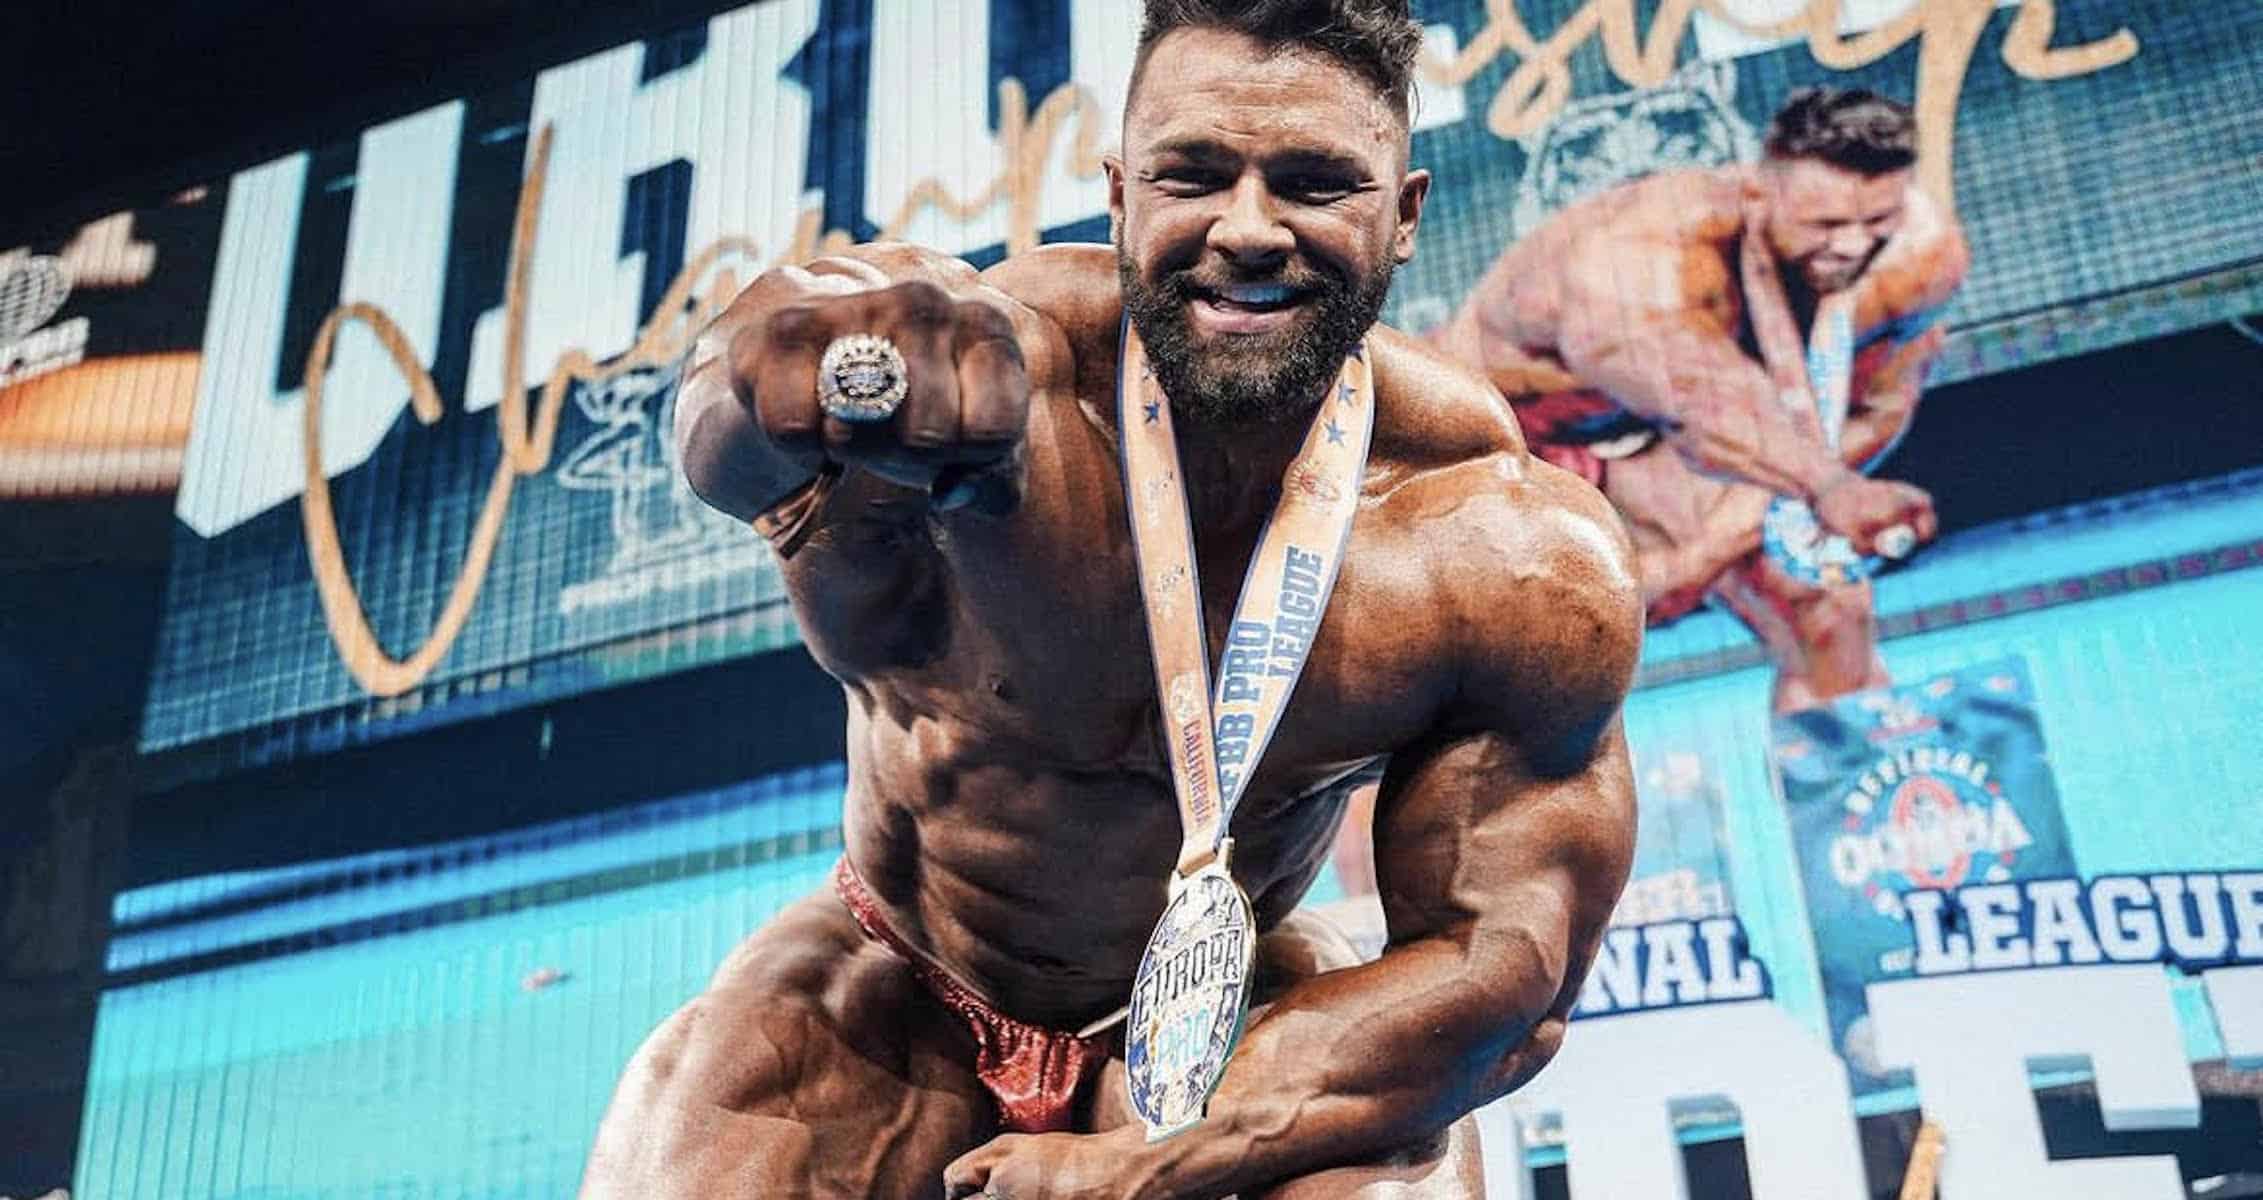 REPORT: The Dubai Pro show is set to add the Men's Open Bodybuilding  division to its schedule for the first time in 2024. The 2024 Dubai…